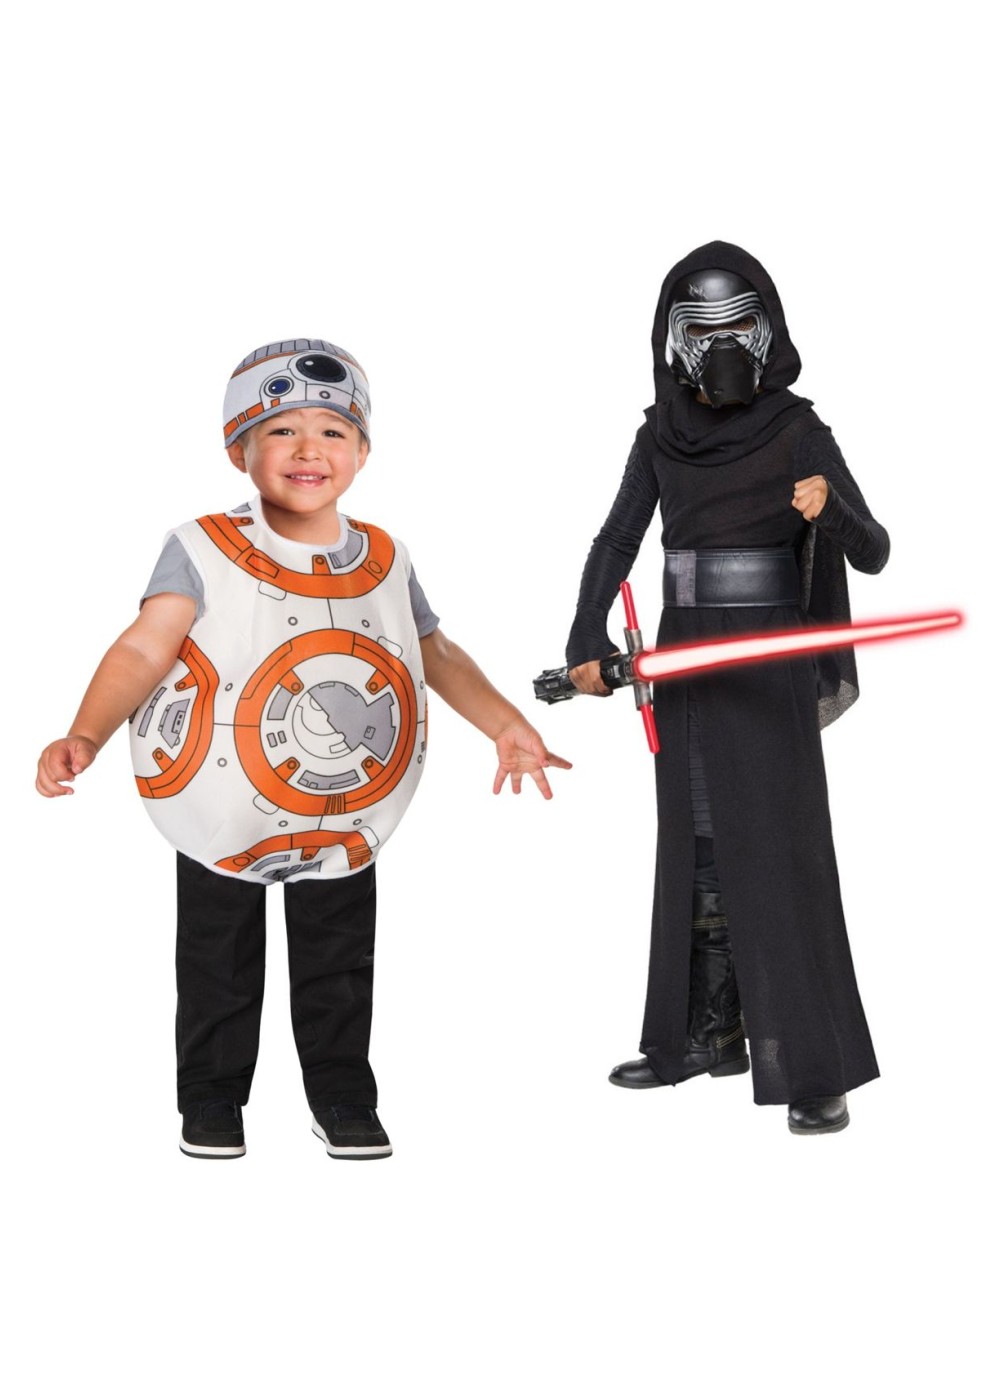 Star Wars Kylo Ren Boys And Bb8 Droid Toddler Boys Costume Set